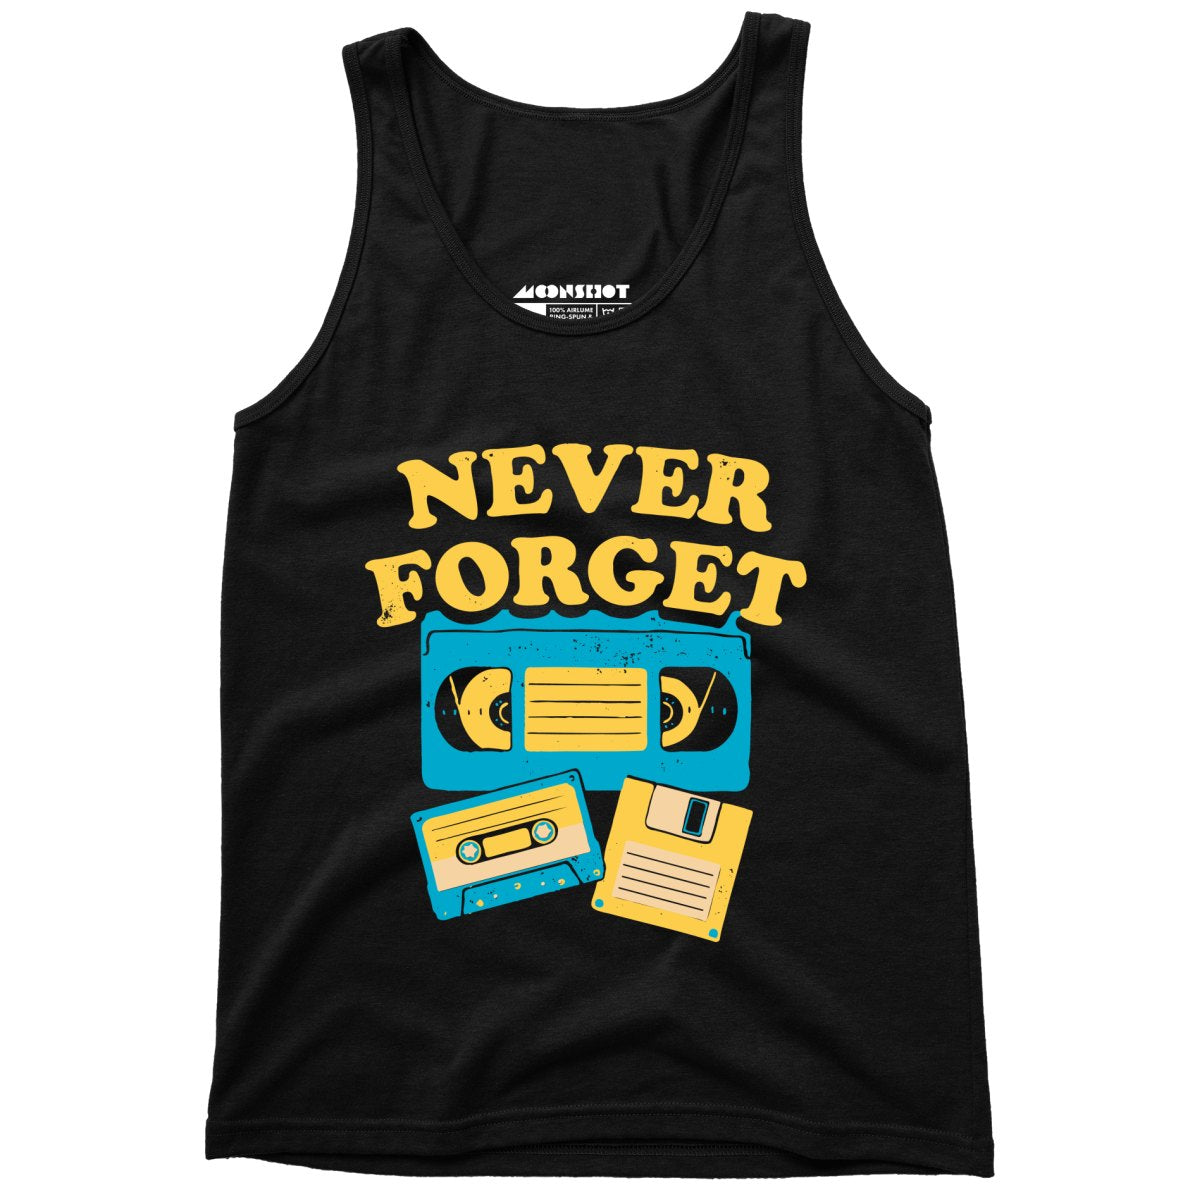 Never Forget - Unisex Tank Top